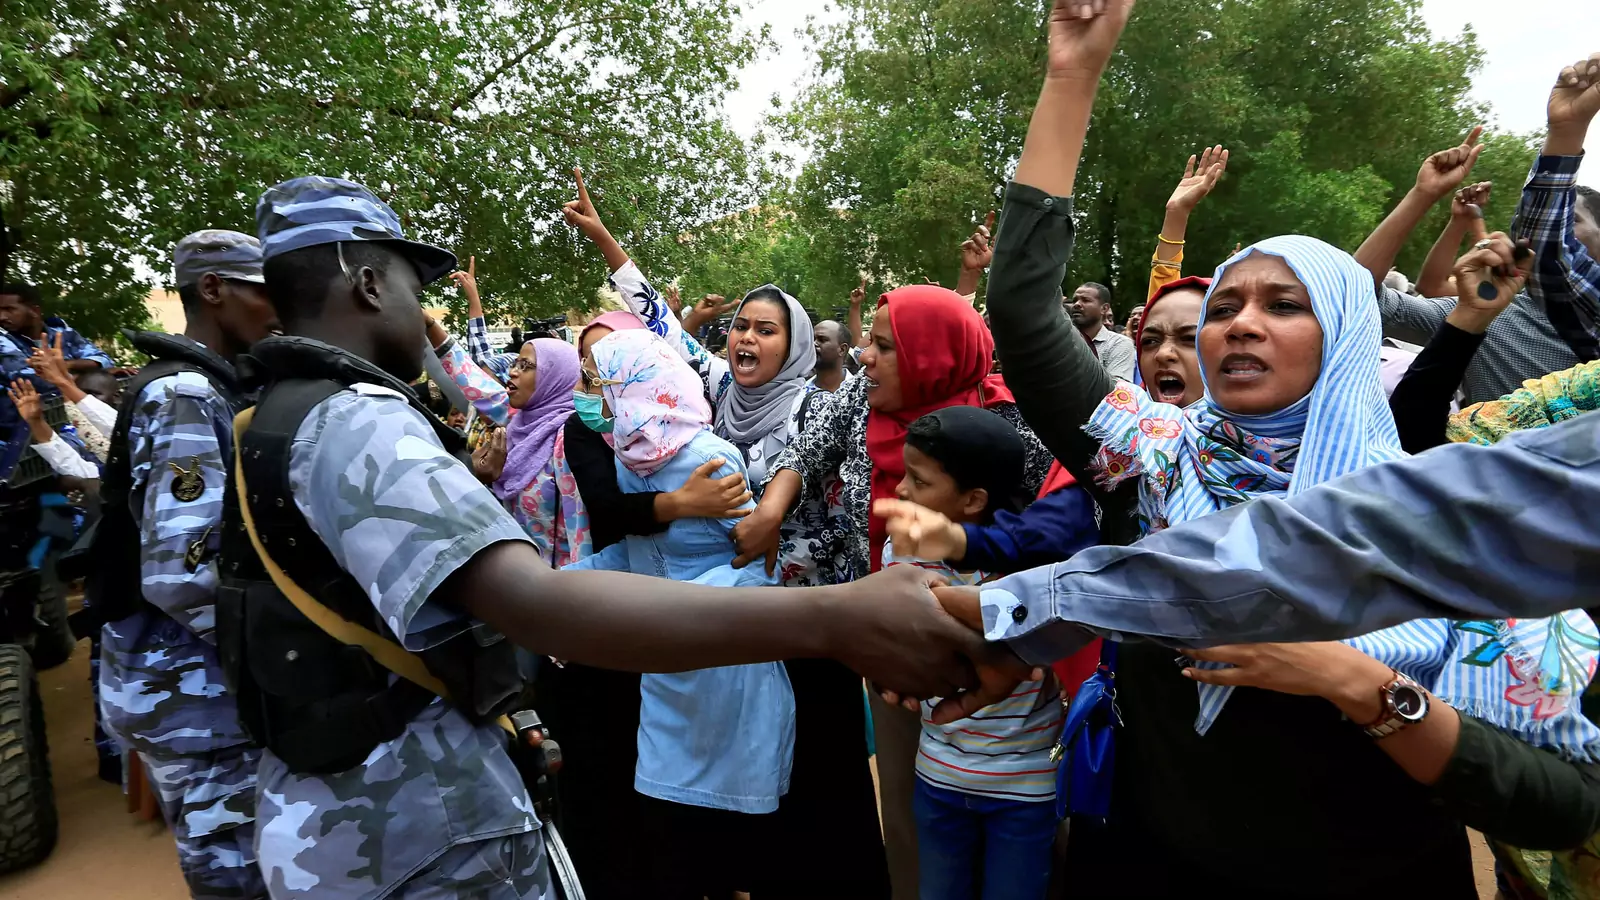 Sudanese chant slogans outside a court during a new trial against ousted President Omar al-Bashir and some of his former allies over the military coup that brought the autocrat to power in 1989, outside a courthouse in Khartoum, Sudan. September 15, 2020